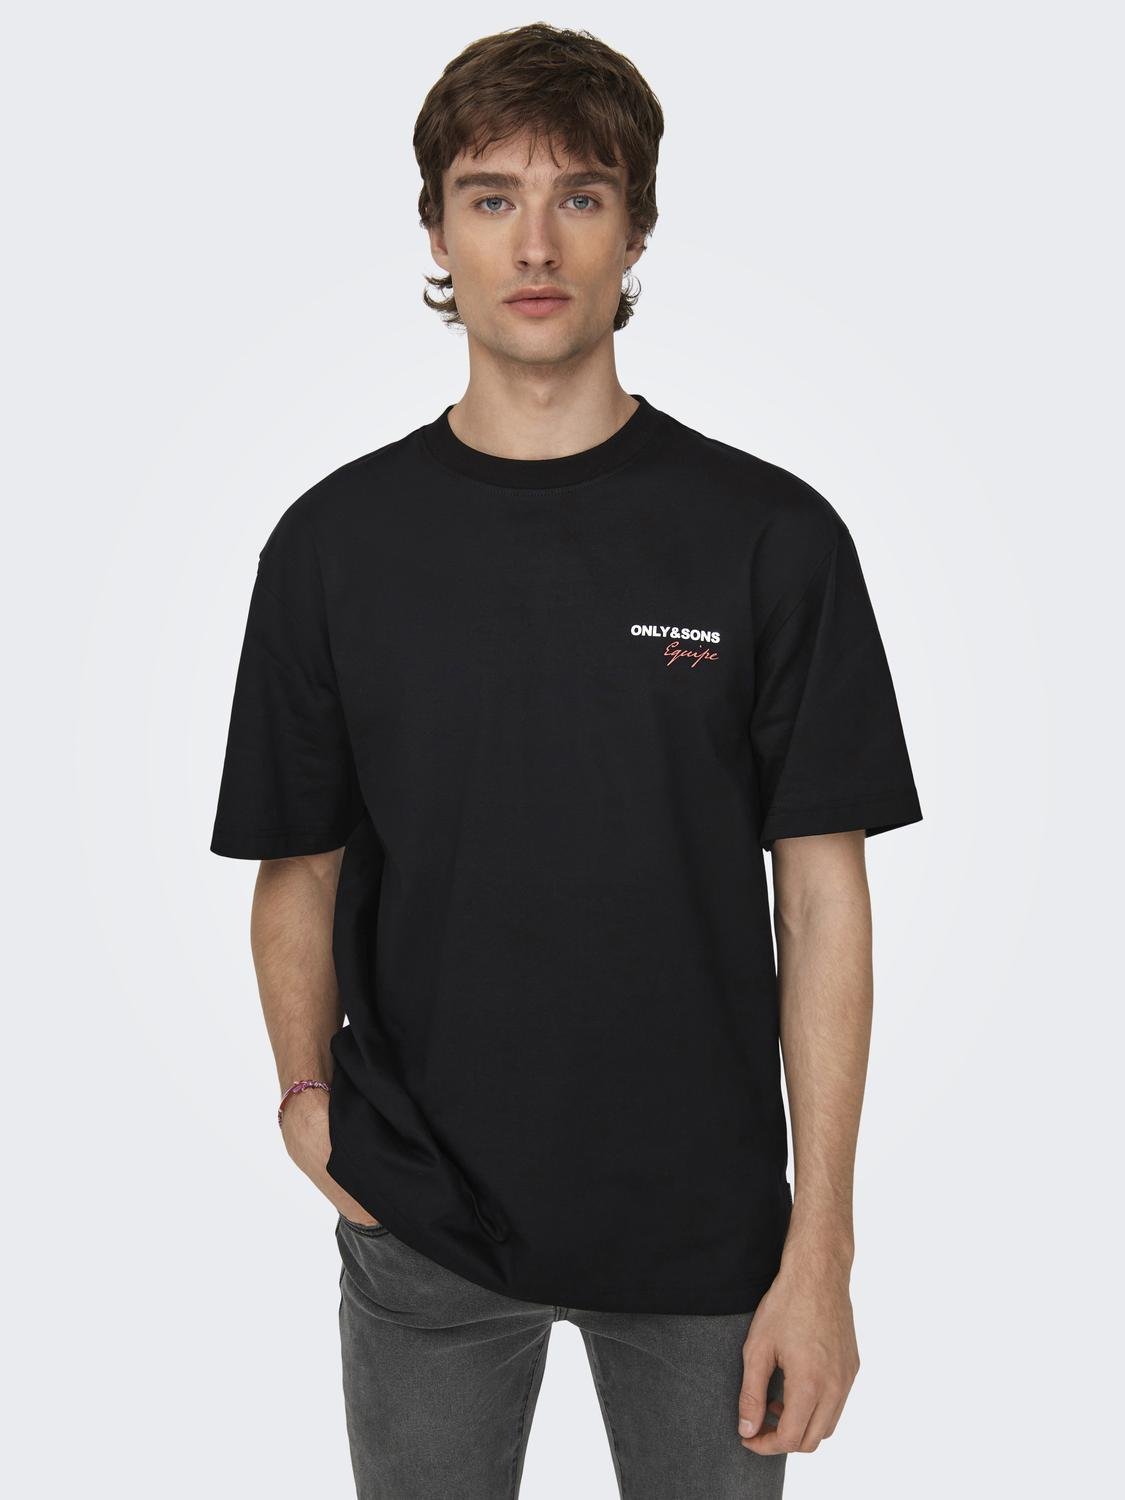 ONLY & SONS Oversized o-neck t-shirt -Black - 22027495